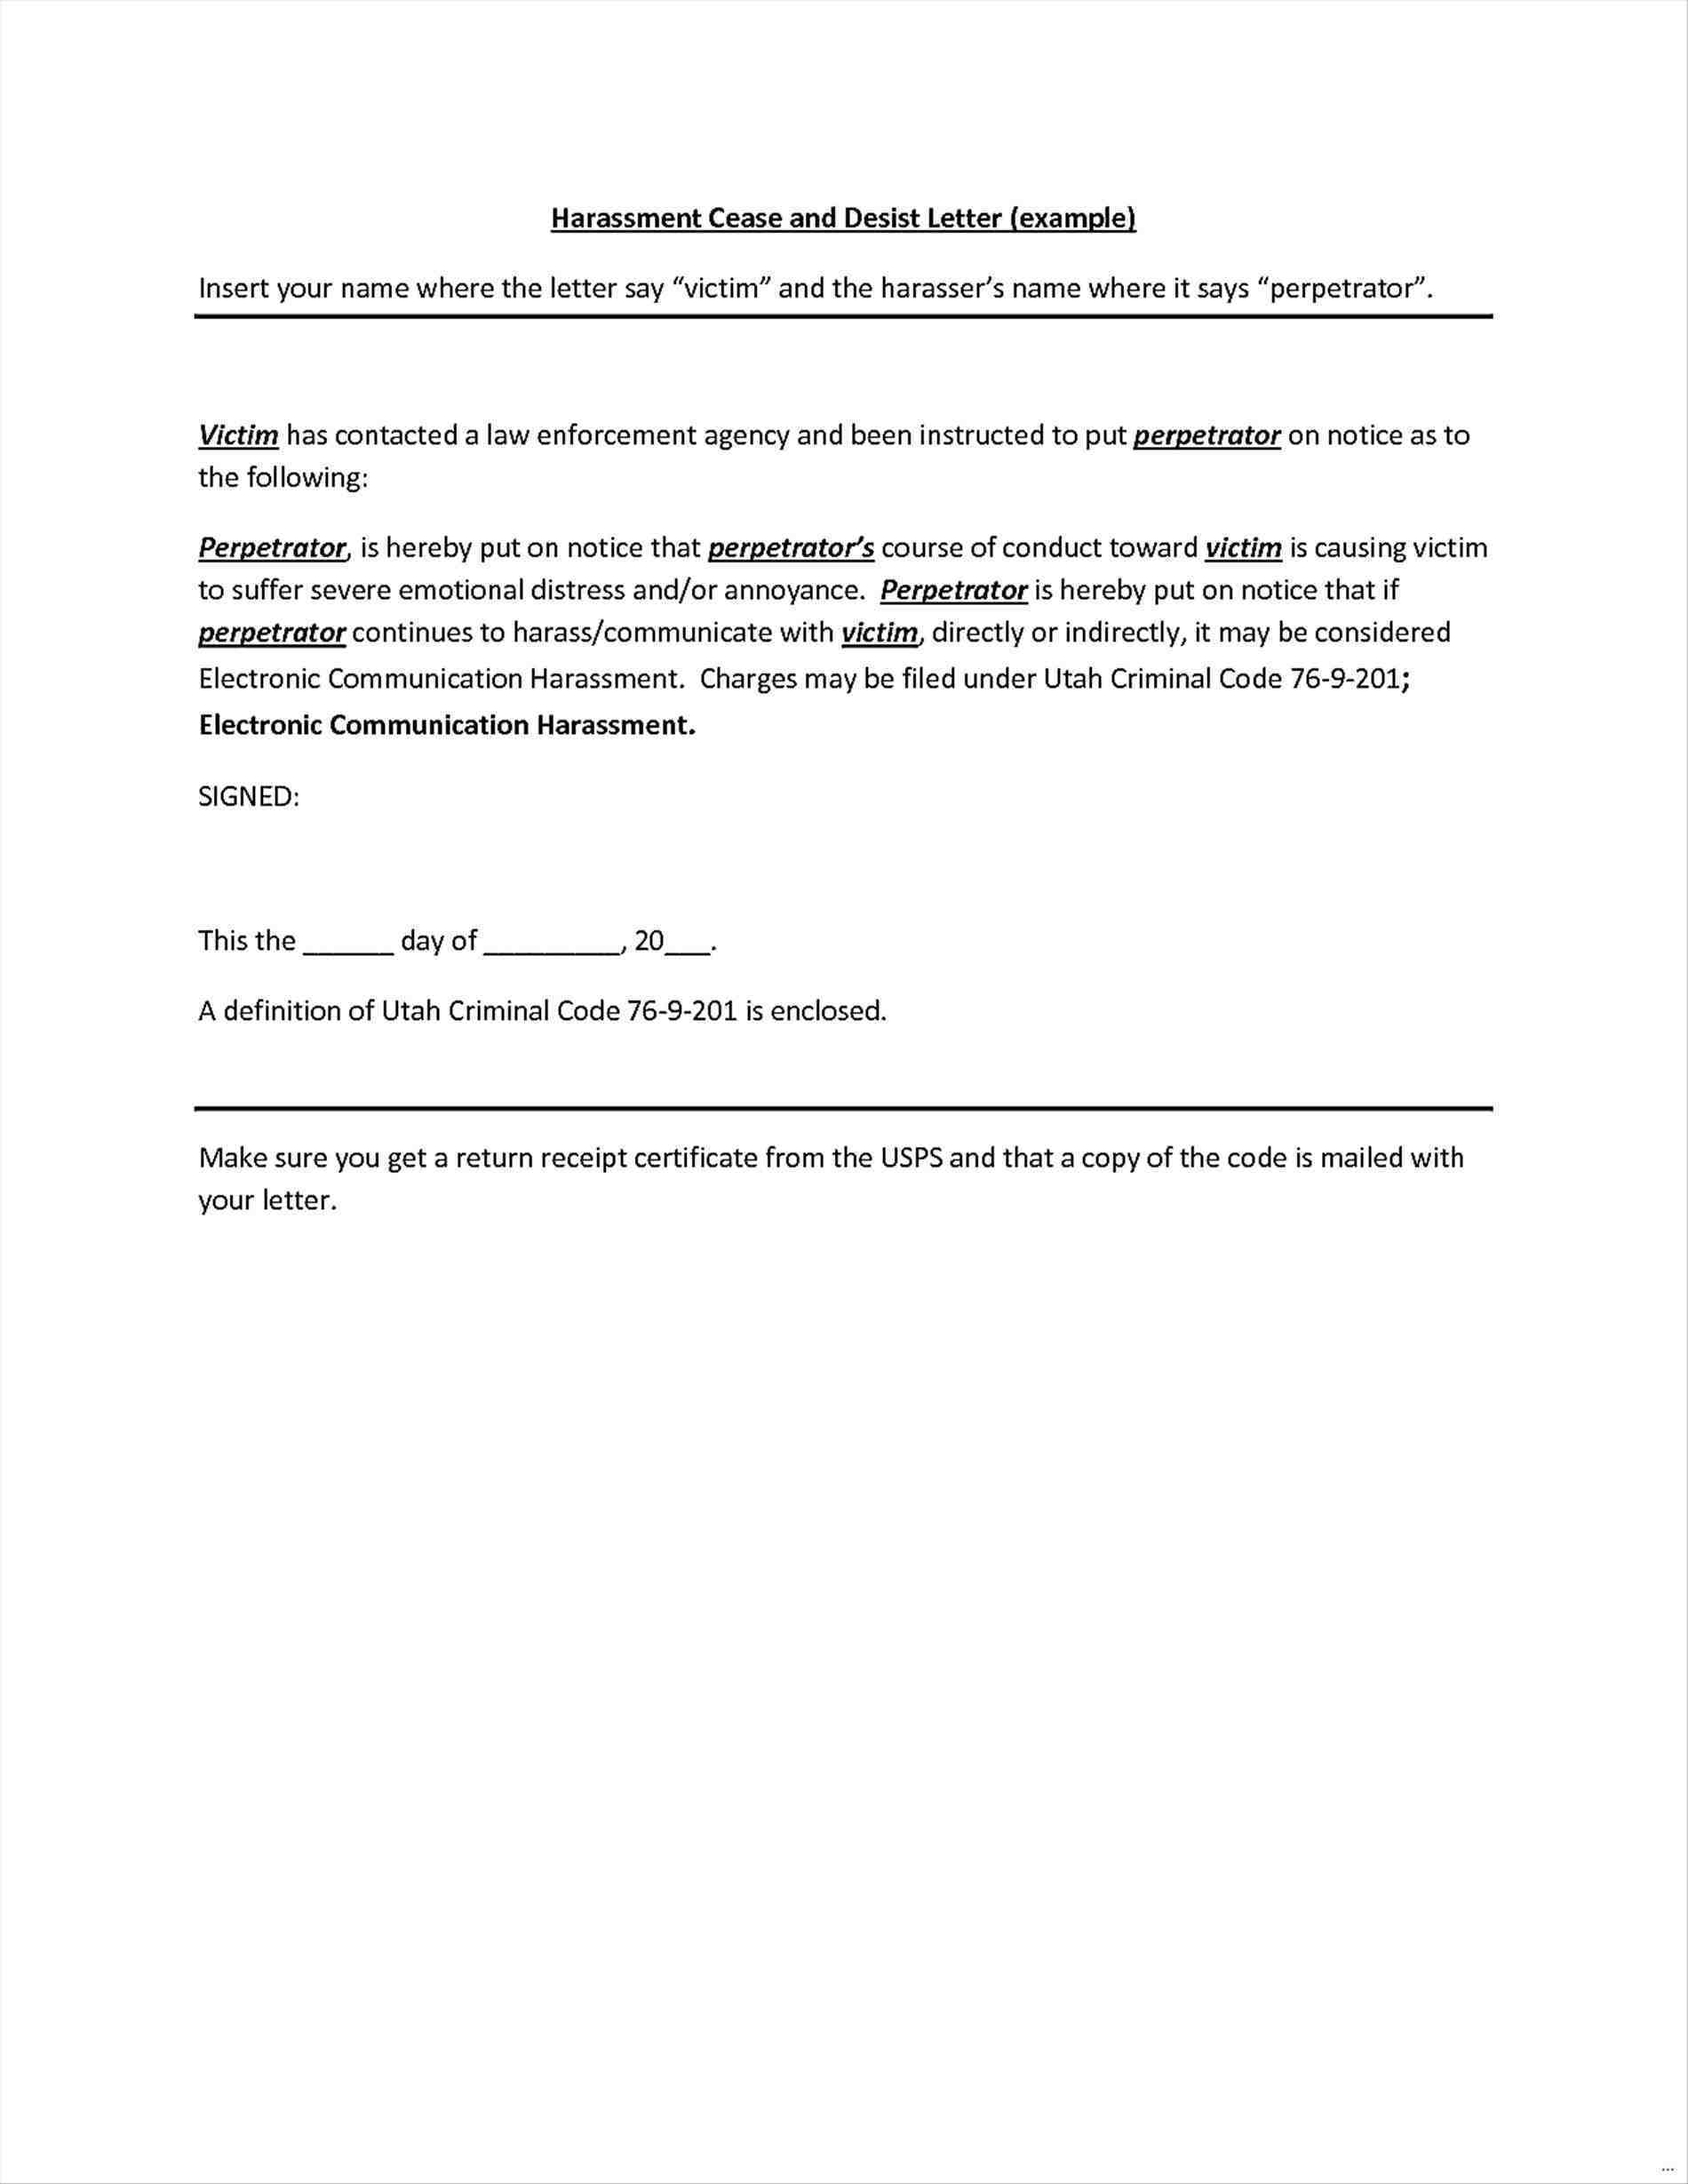 Free Cease and Desist Letter Template for Harassment - What is A Cease and Desist Letter Awesome Cease and Desist Template